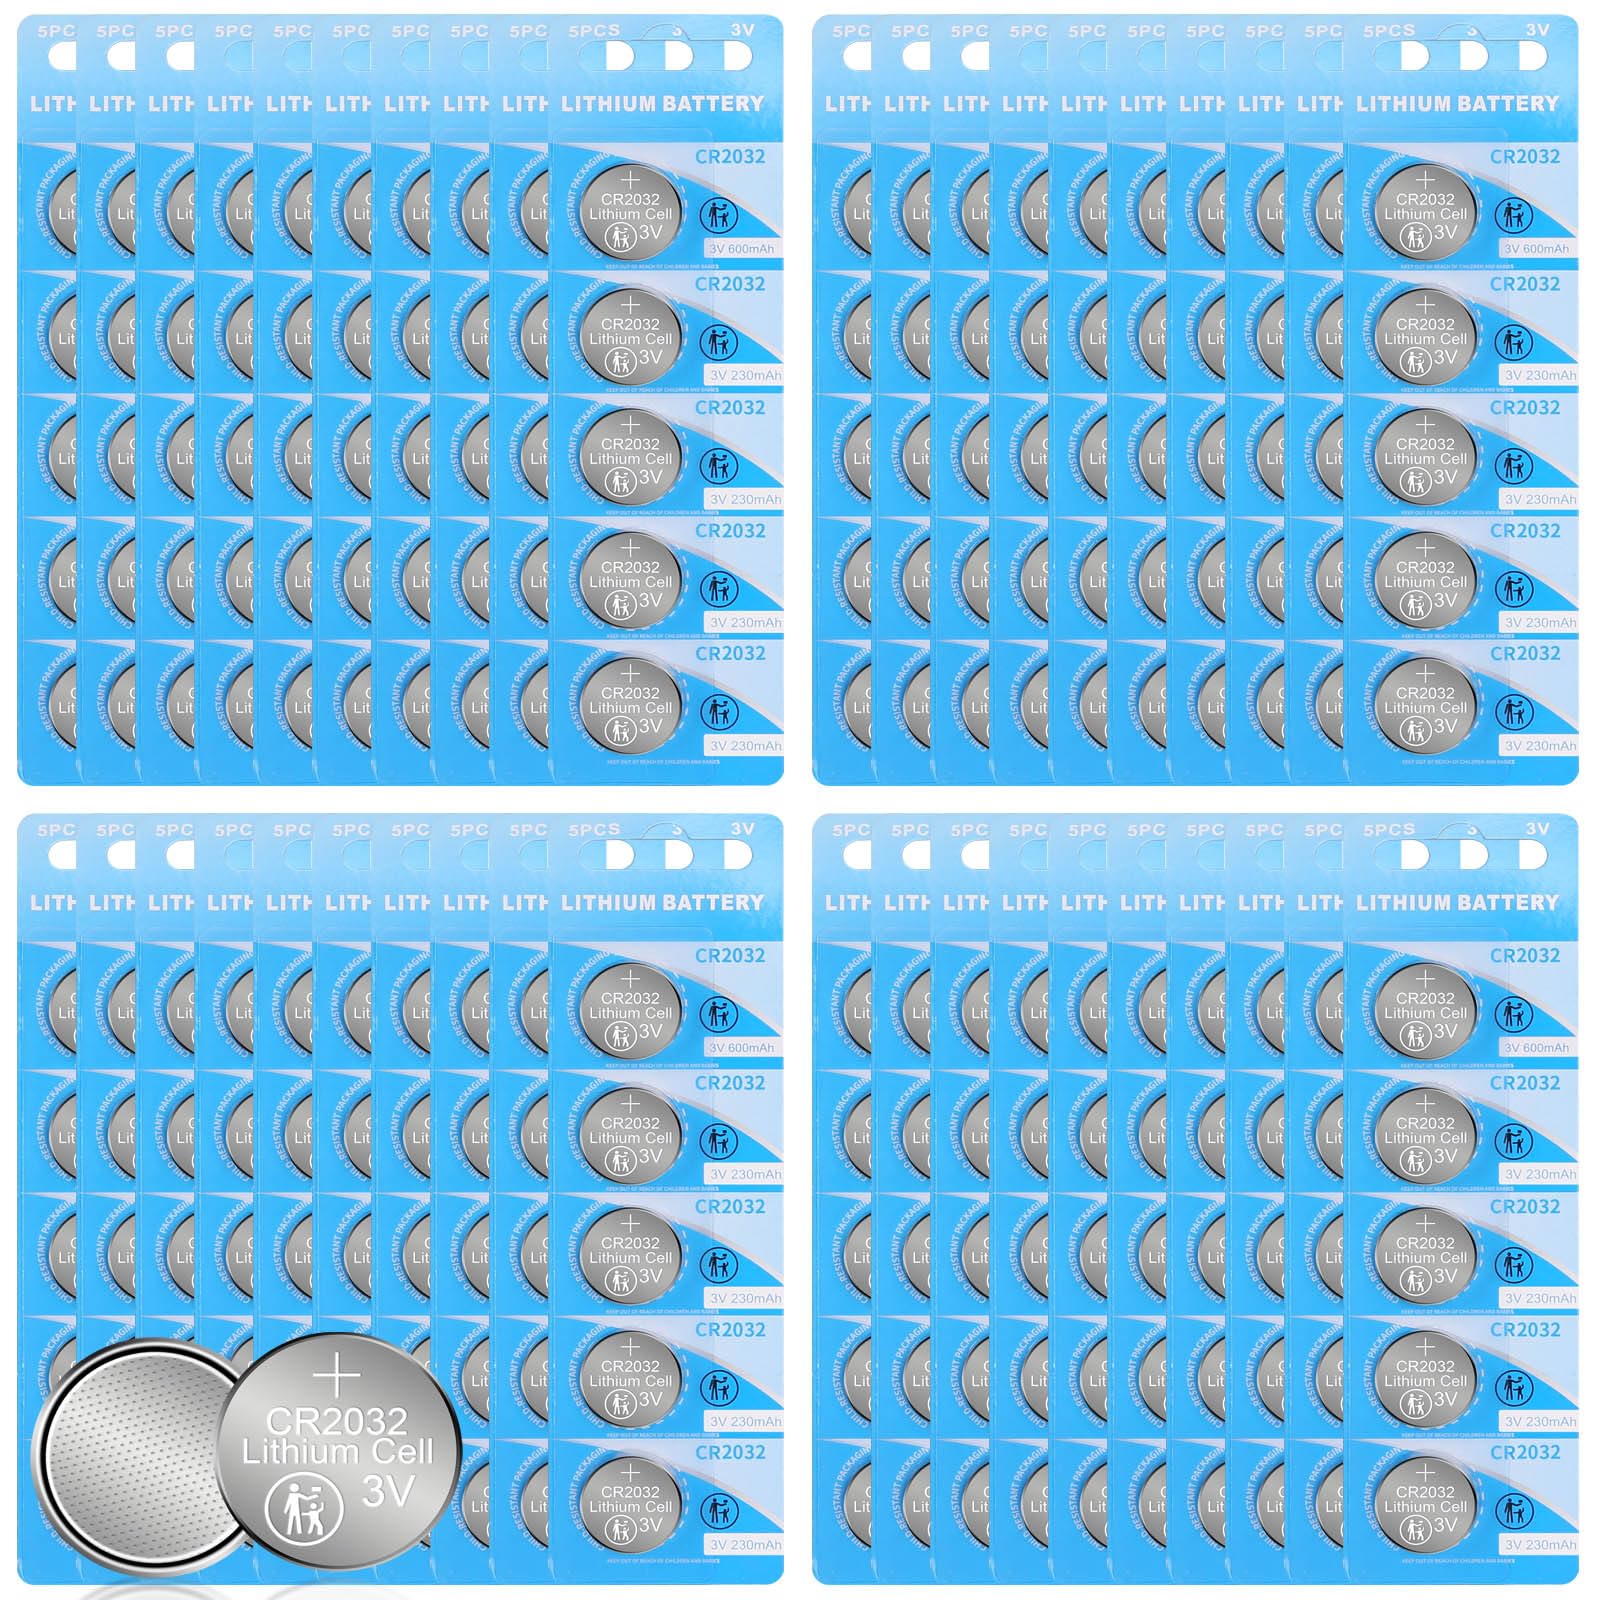 WANZELONYO CR2032 Battery CR2032 3V Lithium Button Cell 230mAh 200 Count